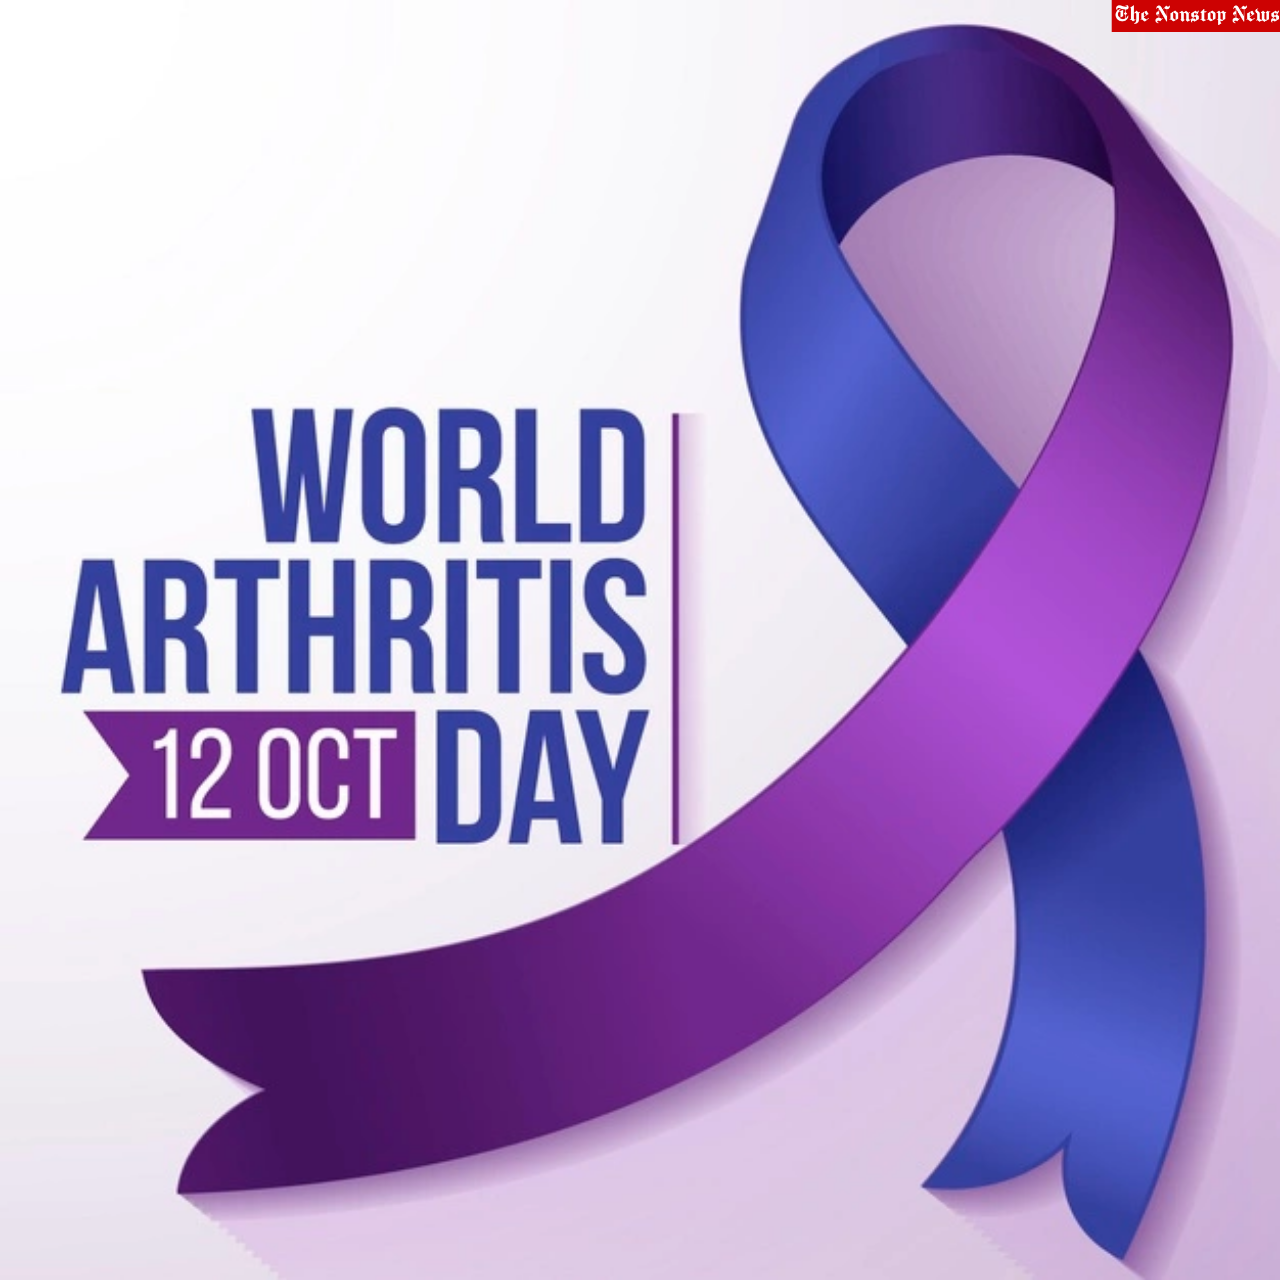 World Arthritis Day 2021 Quotes, Poster, Images, and Slogans to Create awareness